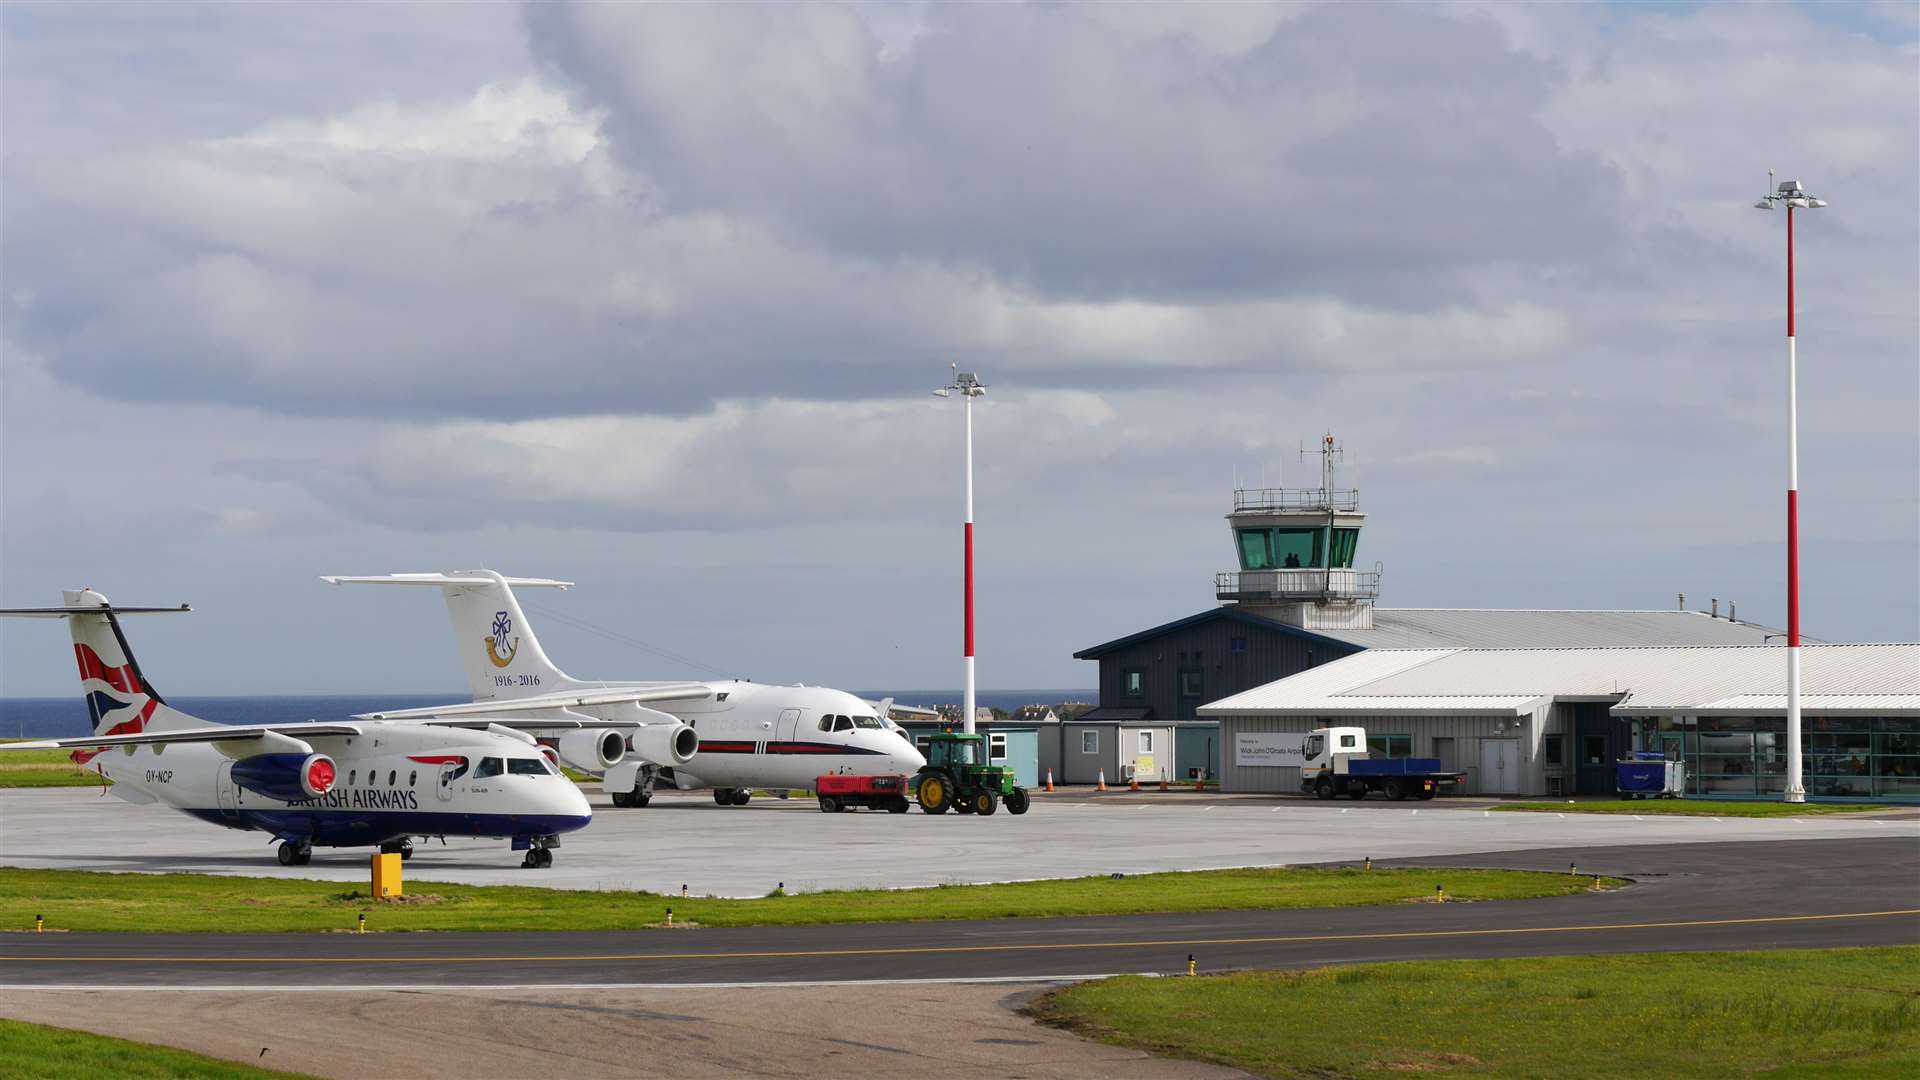 Up to £4 million will be made available to Highland Council over the next four financial years to restore services to and from Wick John O'Groats Airport.